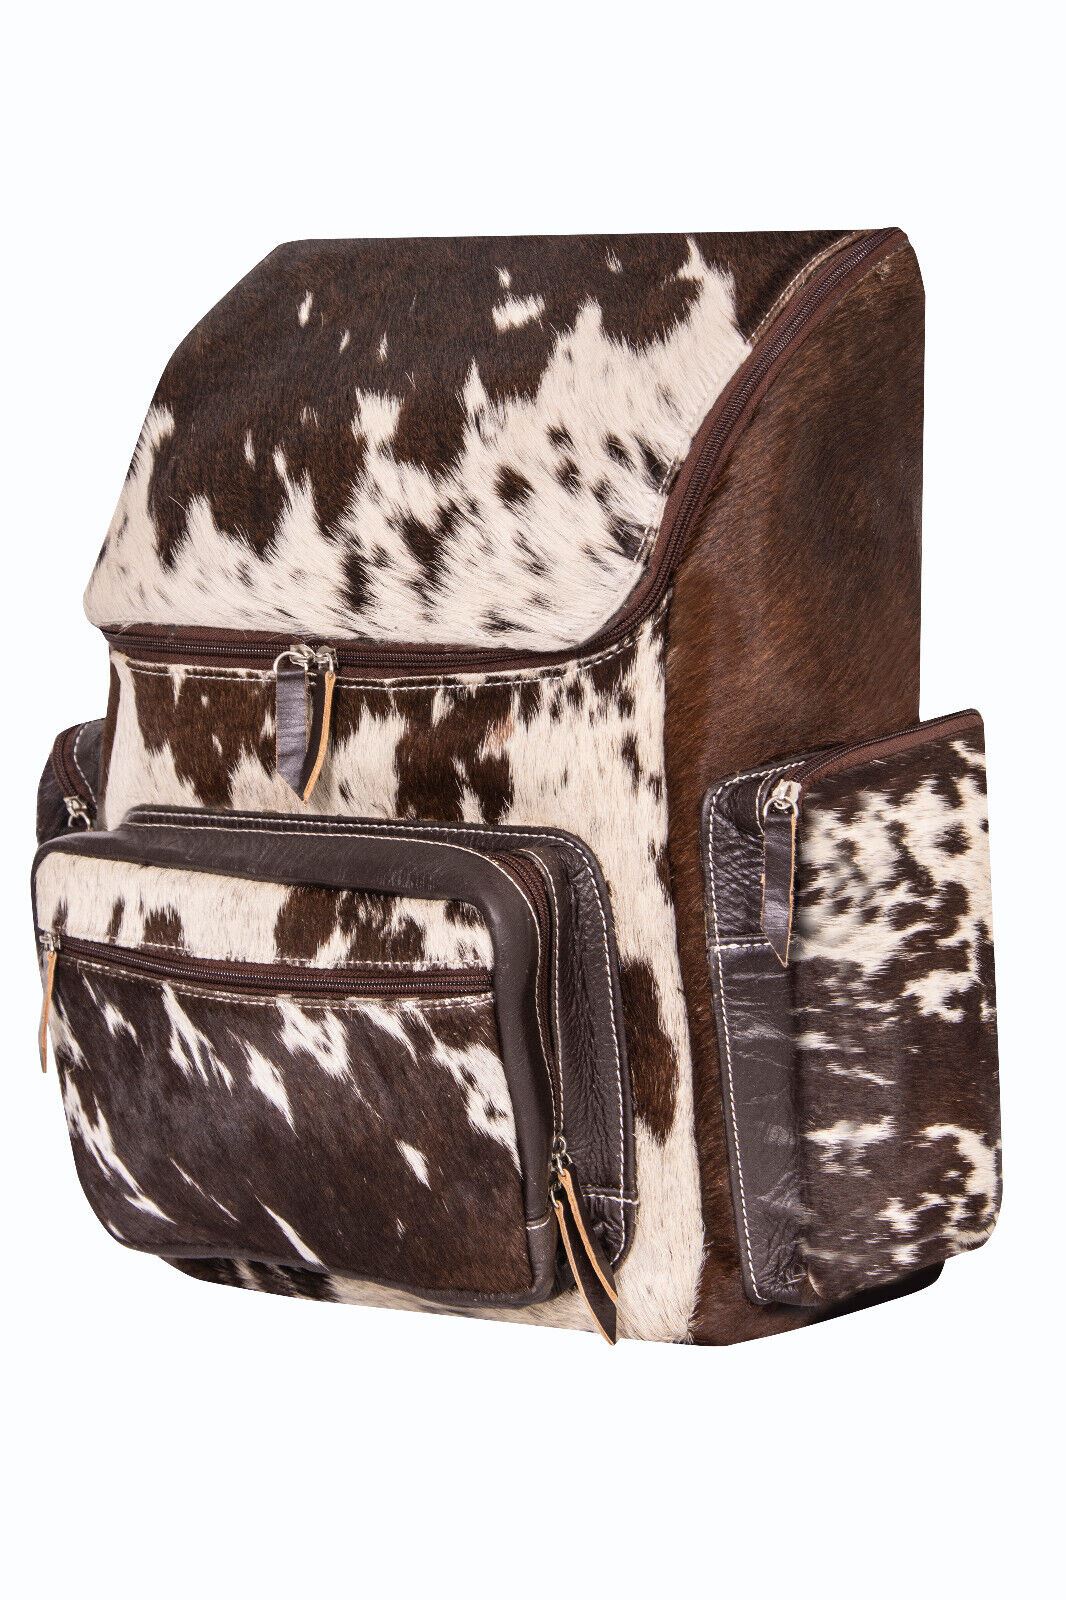 Deluxe Brown Leather Backpack Bag Genuine Cowhide &amp; Cow Fur Travel Rucksack - Upperclass Fashions 